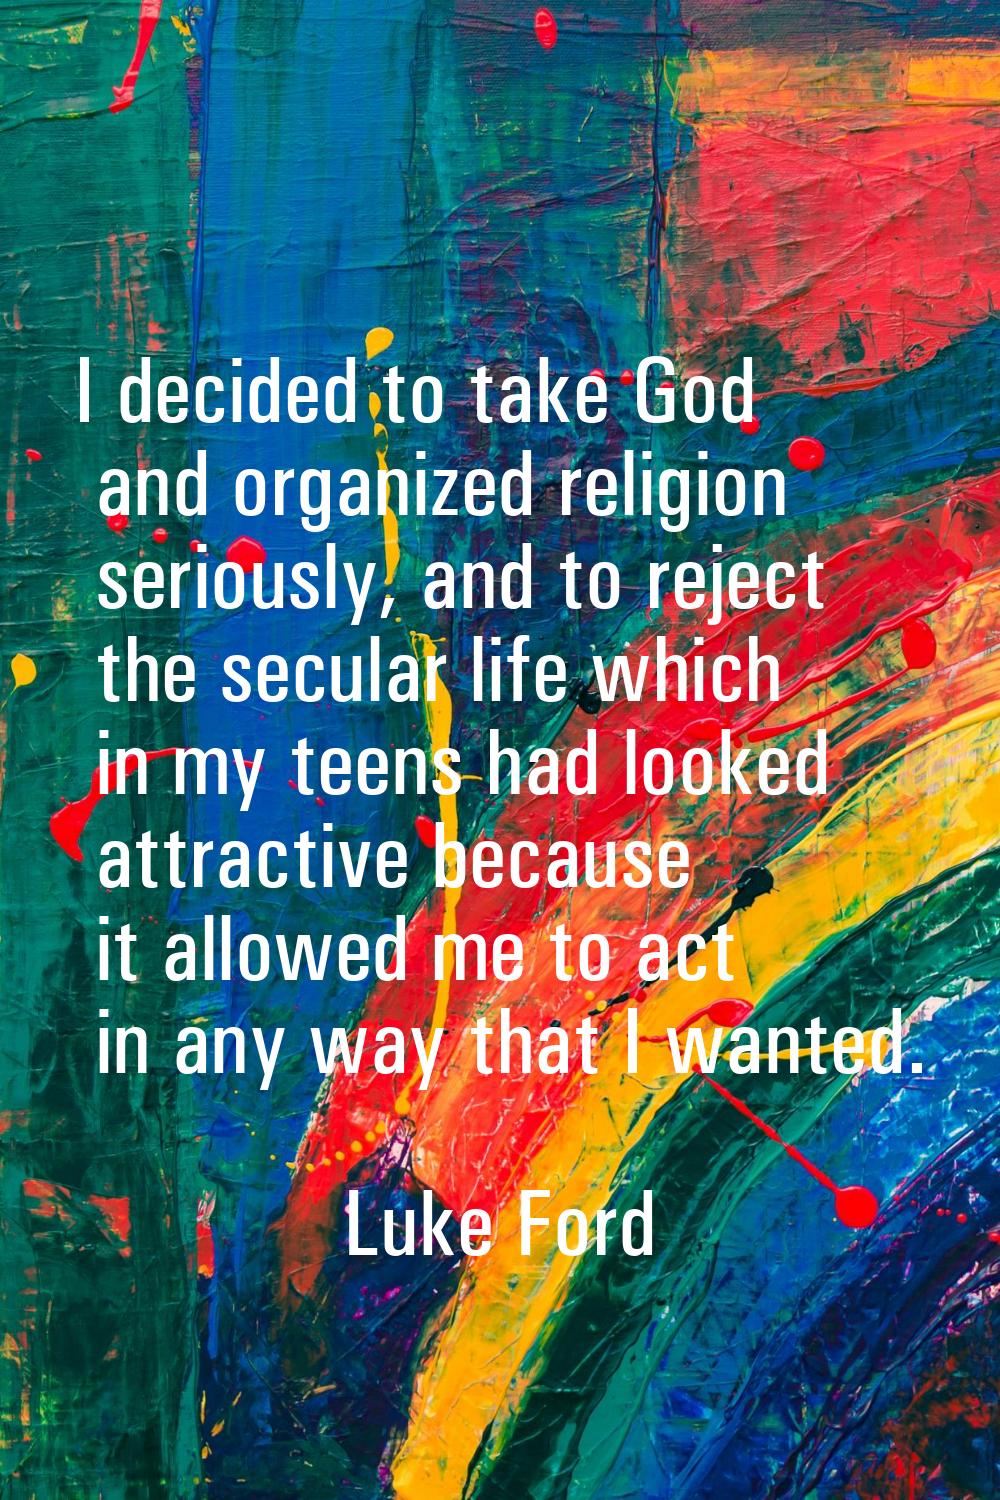 I decided to take God and organized religion seriously, and to reject the secular life which in my 